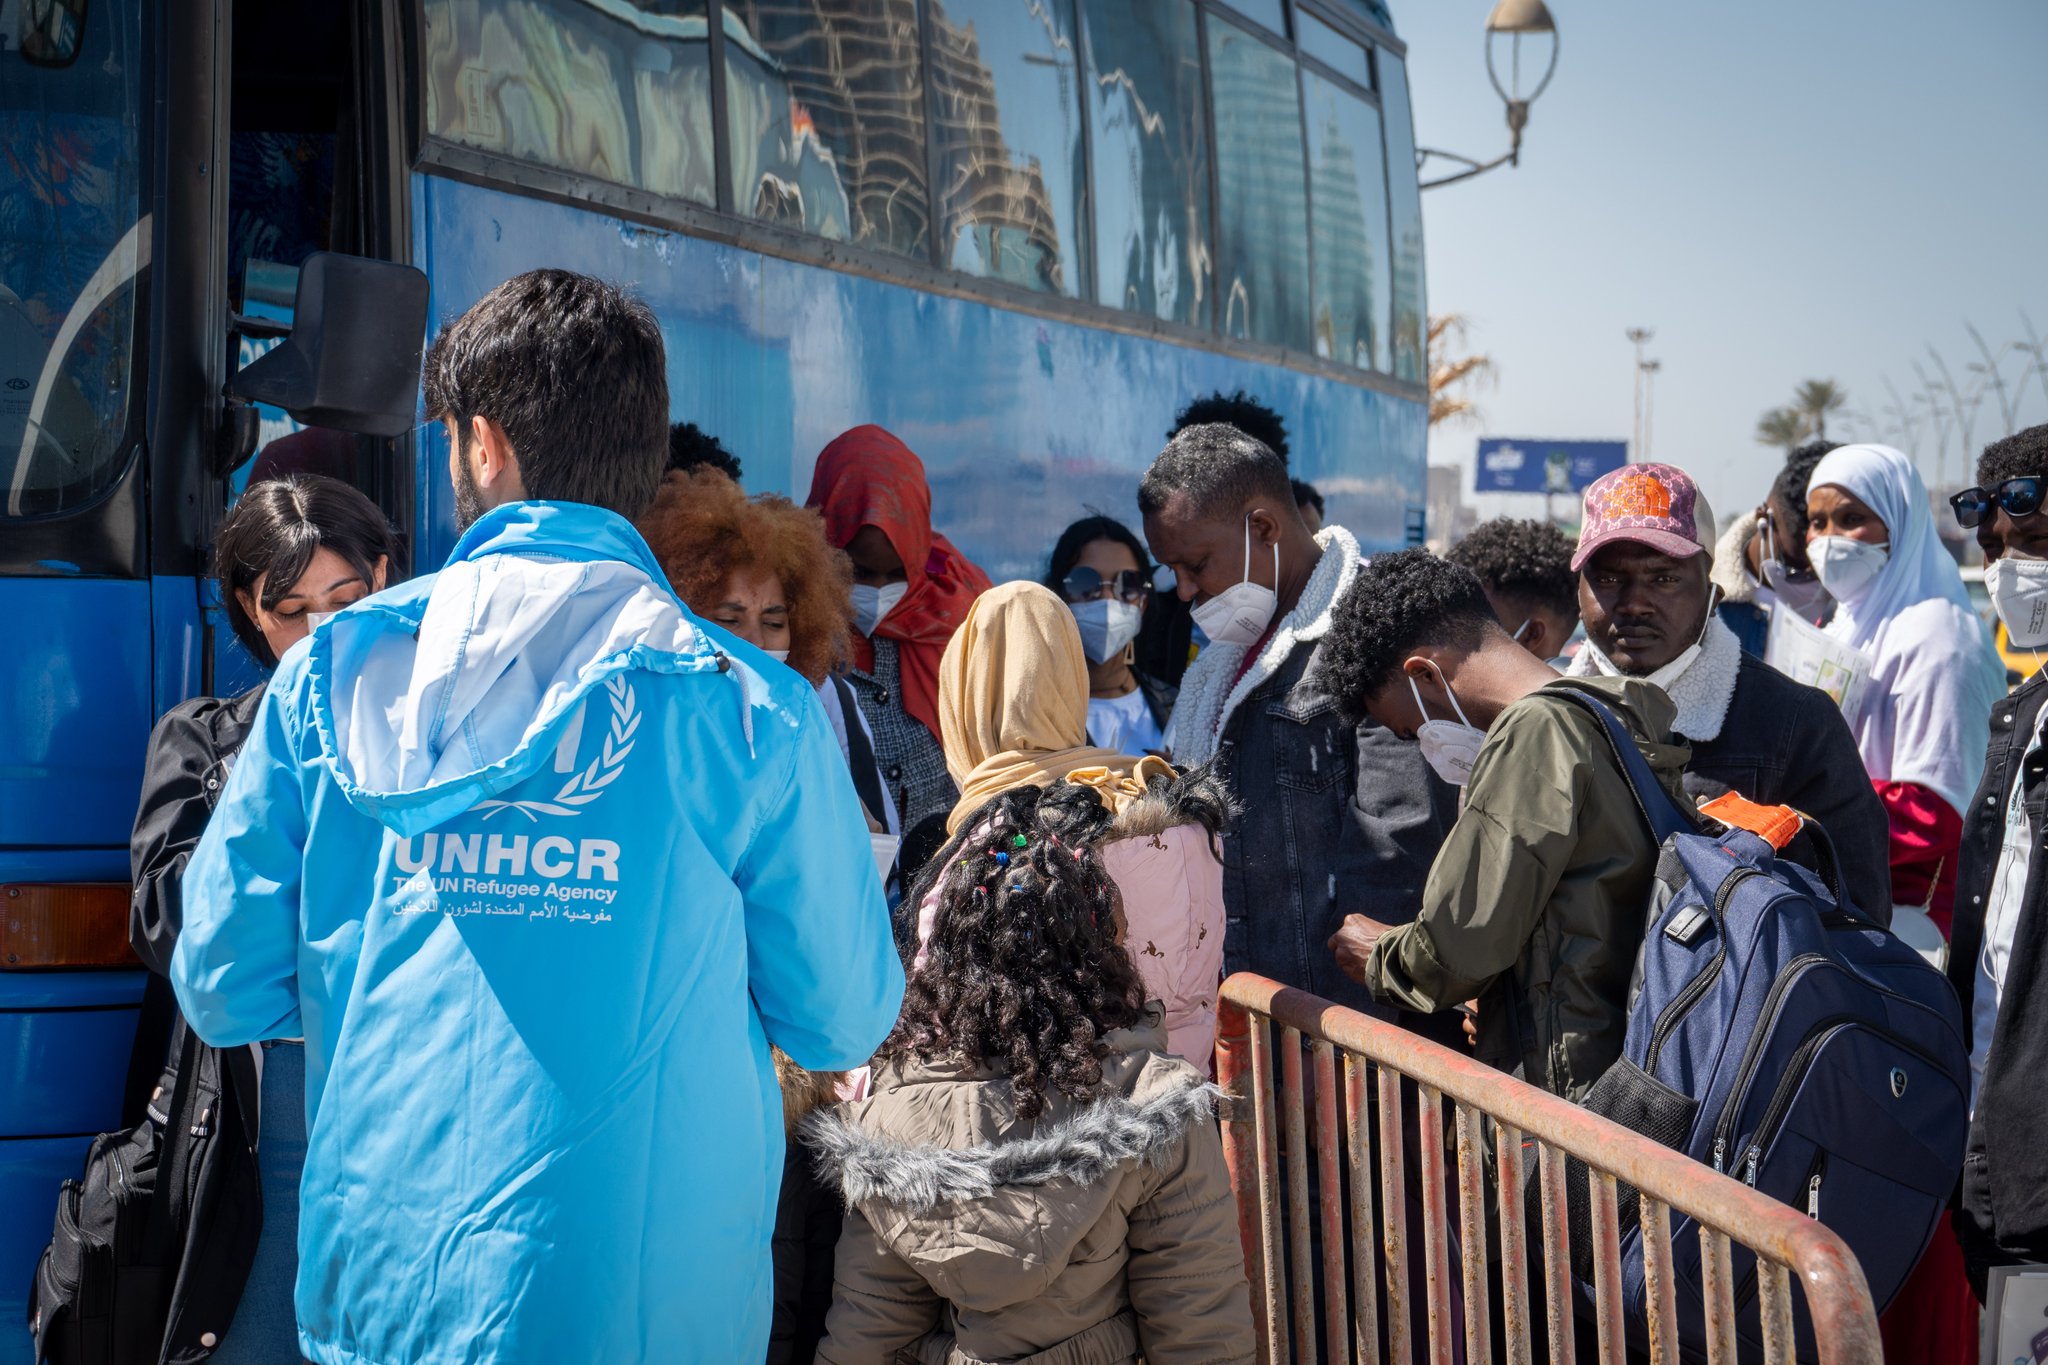 Working together to improve the plight of migrants and refugees in Libya